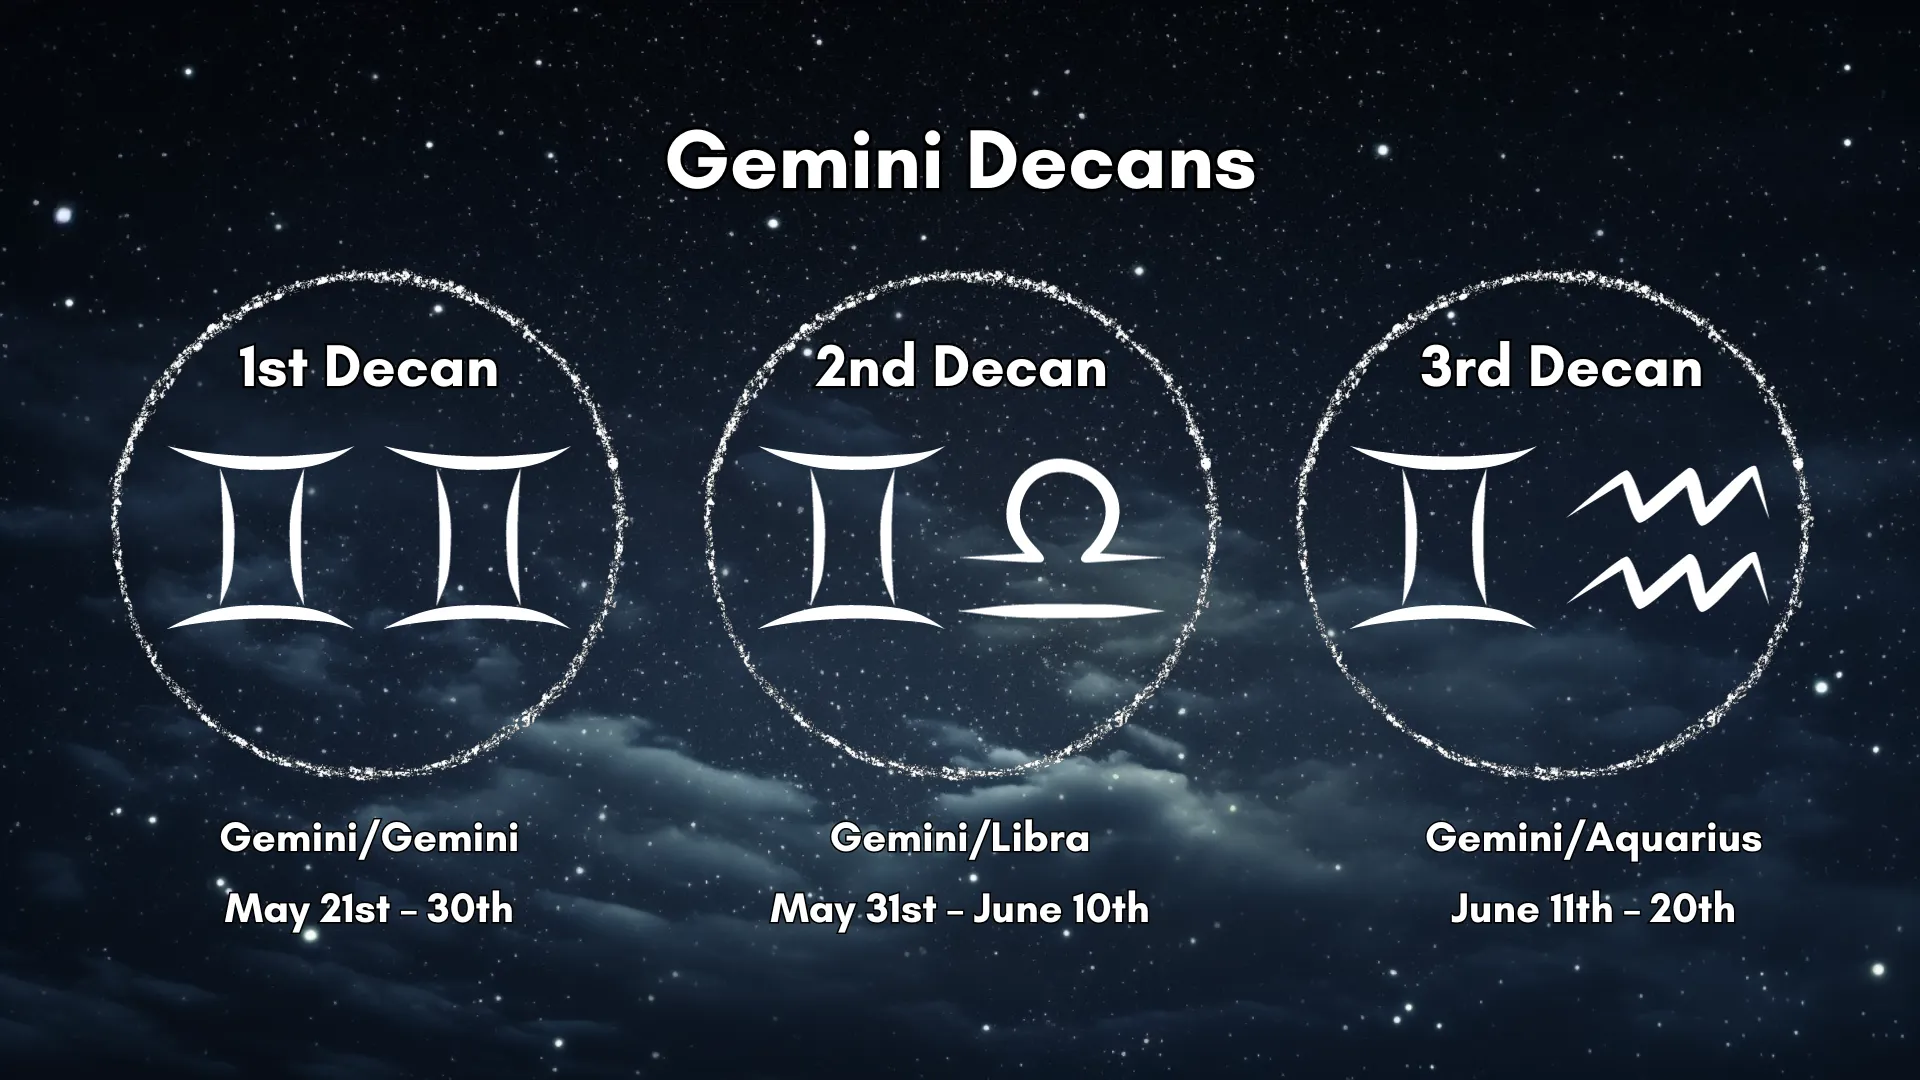 The Gemini Decans are laid out in a chart that is easy to understand.